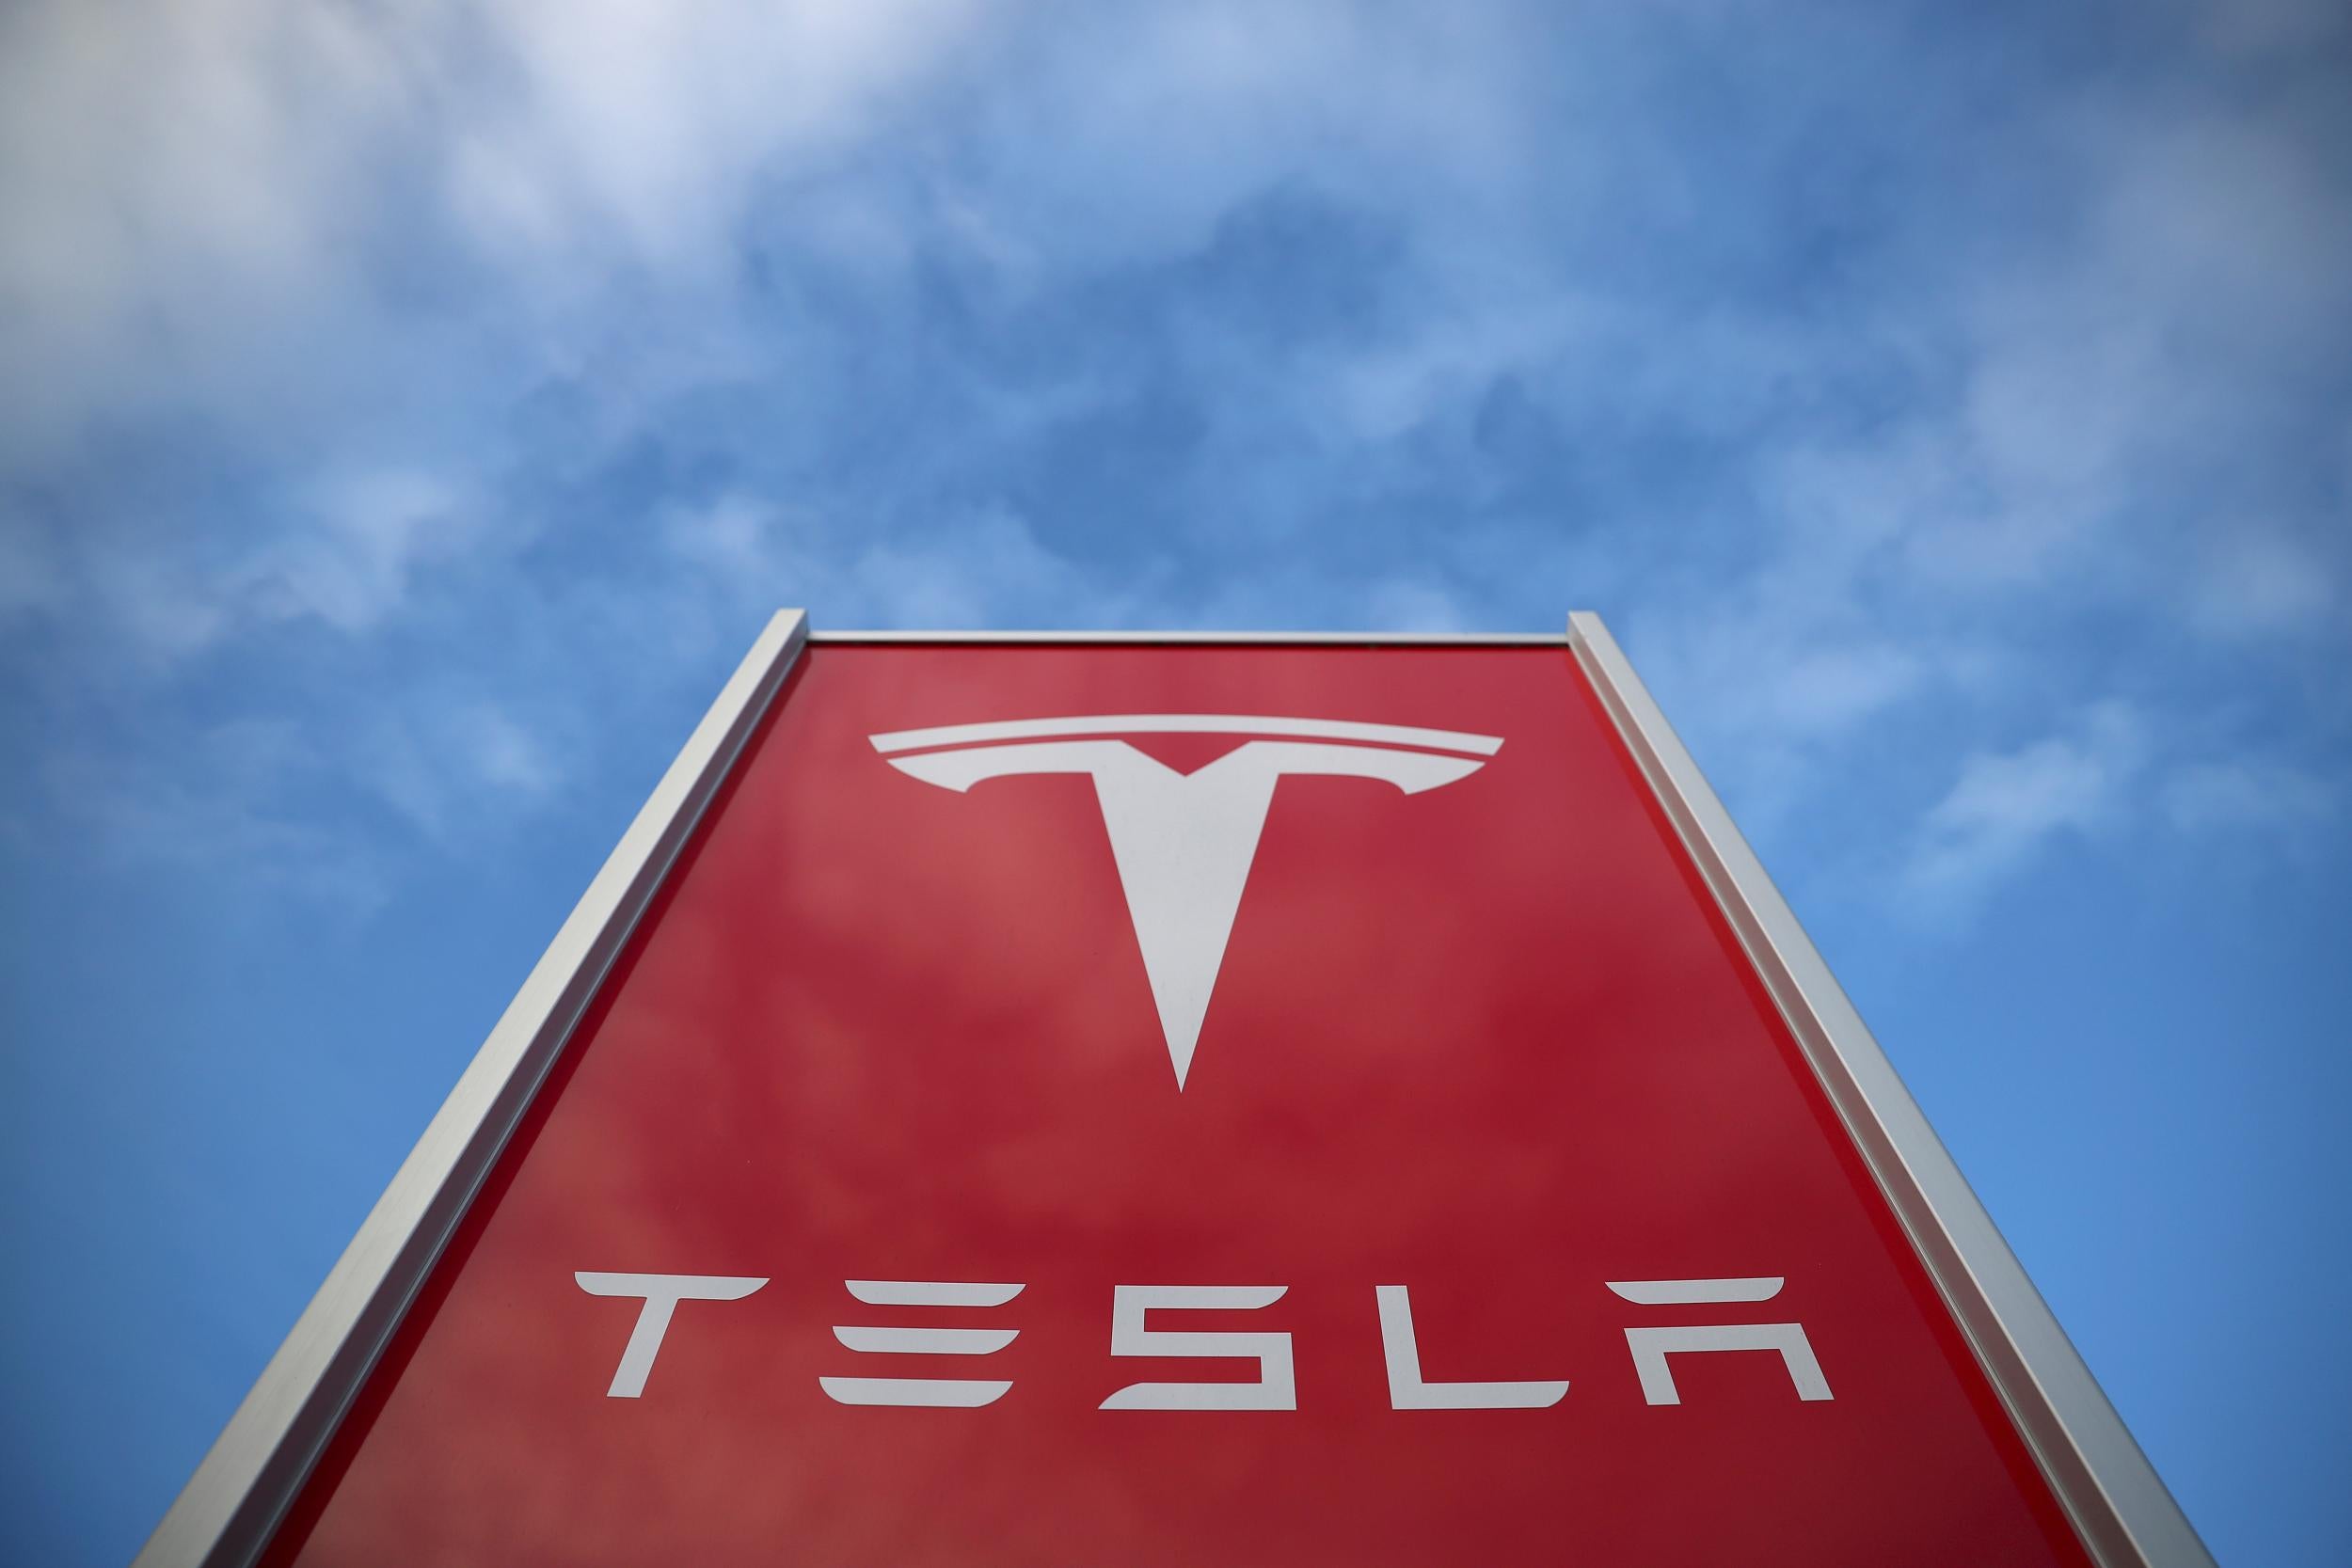 Tesla told the police a former employee threatened to shoot up the Gigafactory